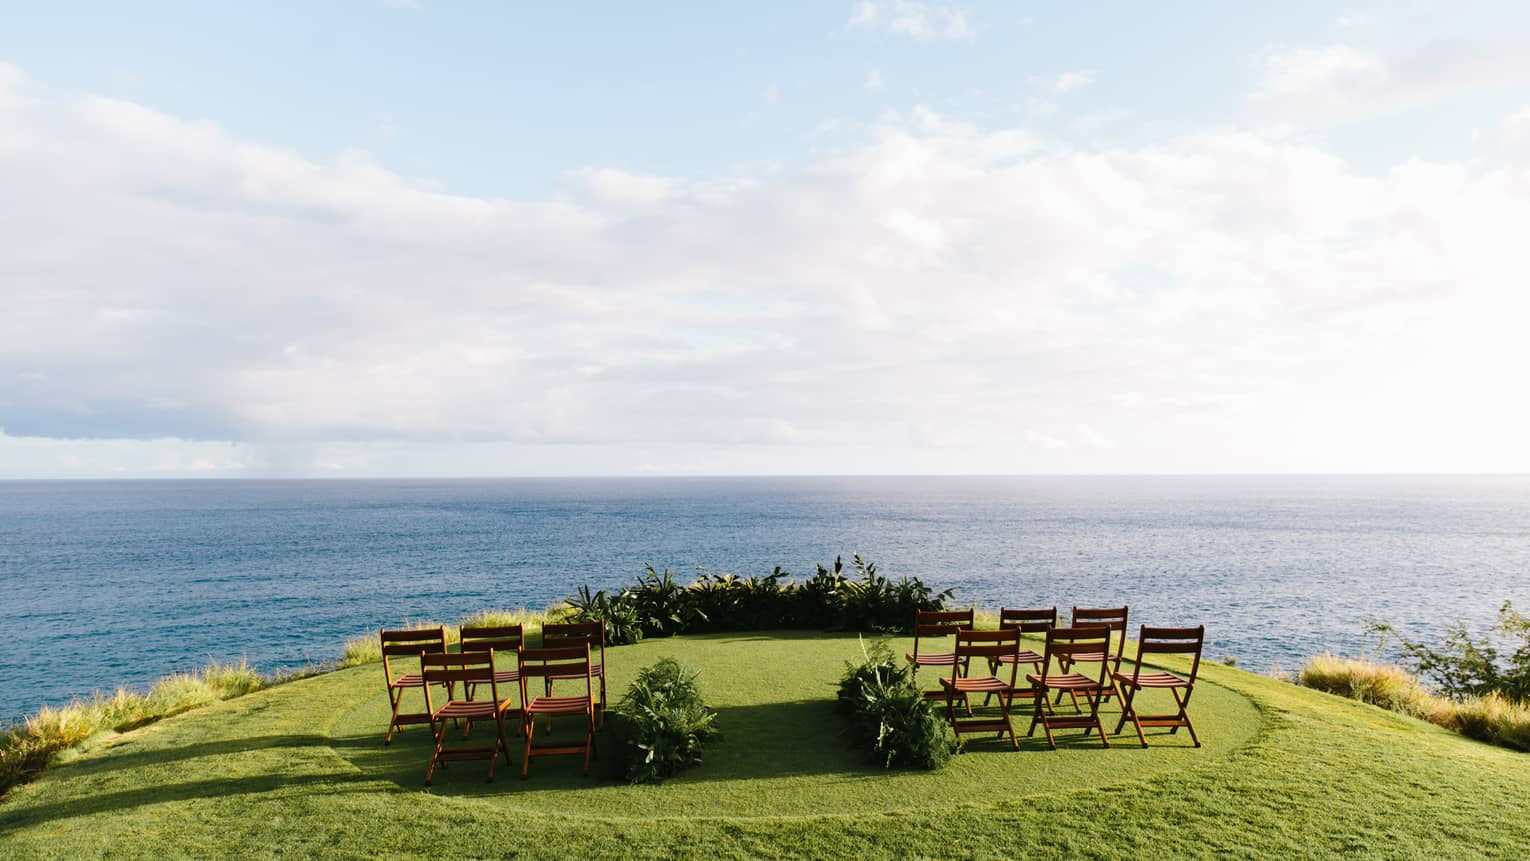 A series of wooden chairs set up on a green golf course overlooking a calm blue sea.